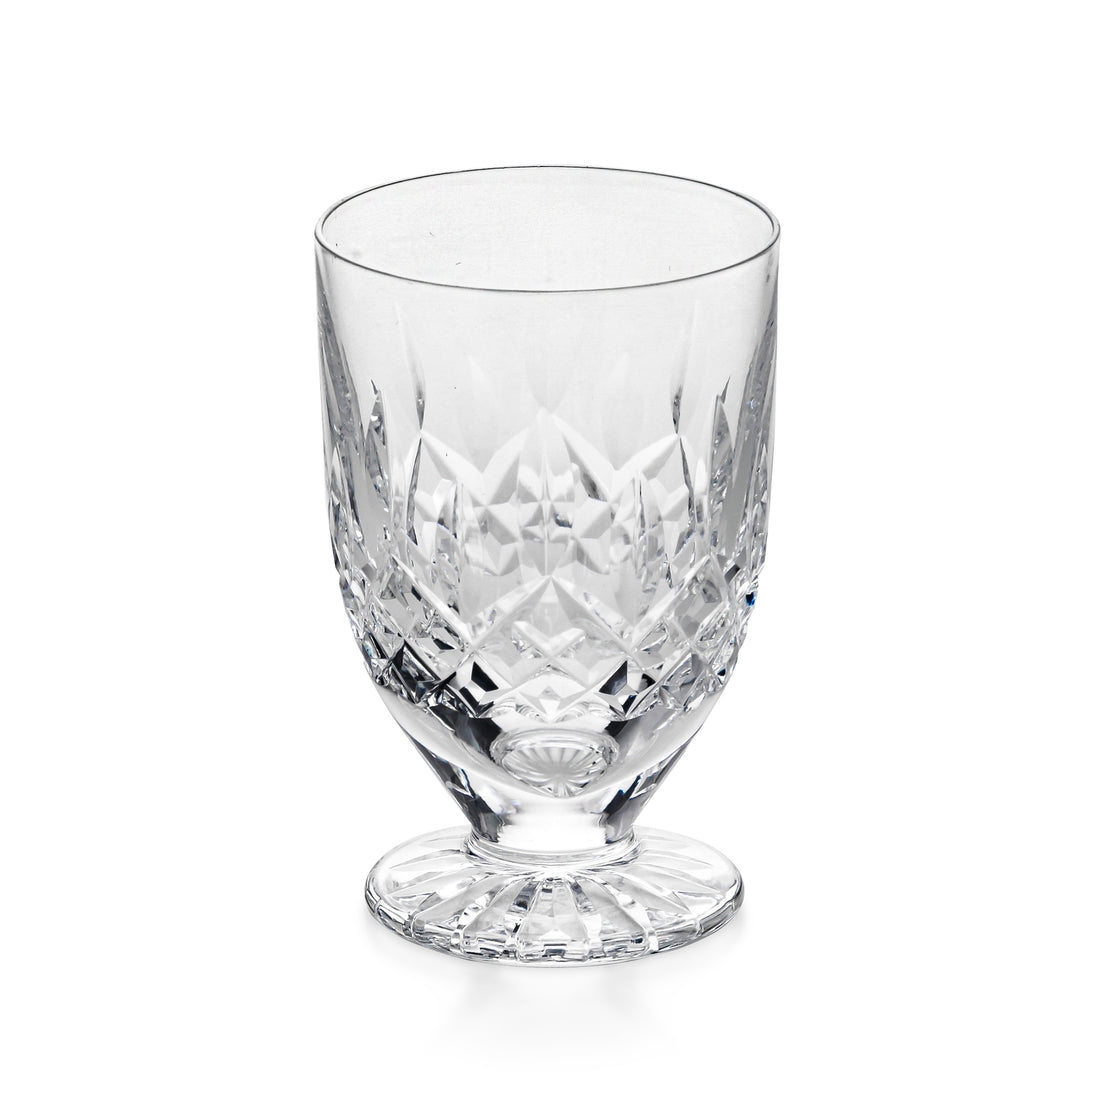 WATERFORD Lismore Footed Juice Glasses - Set of 6